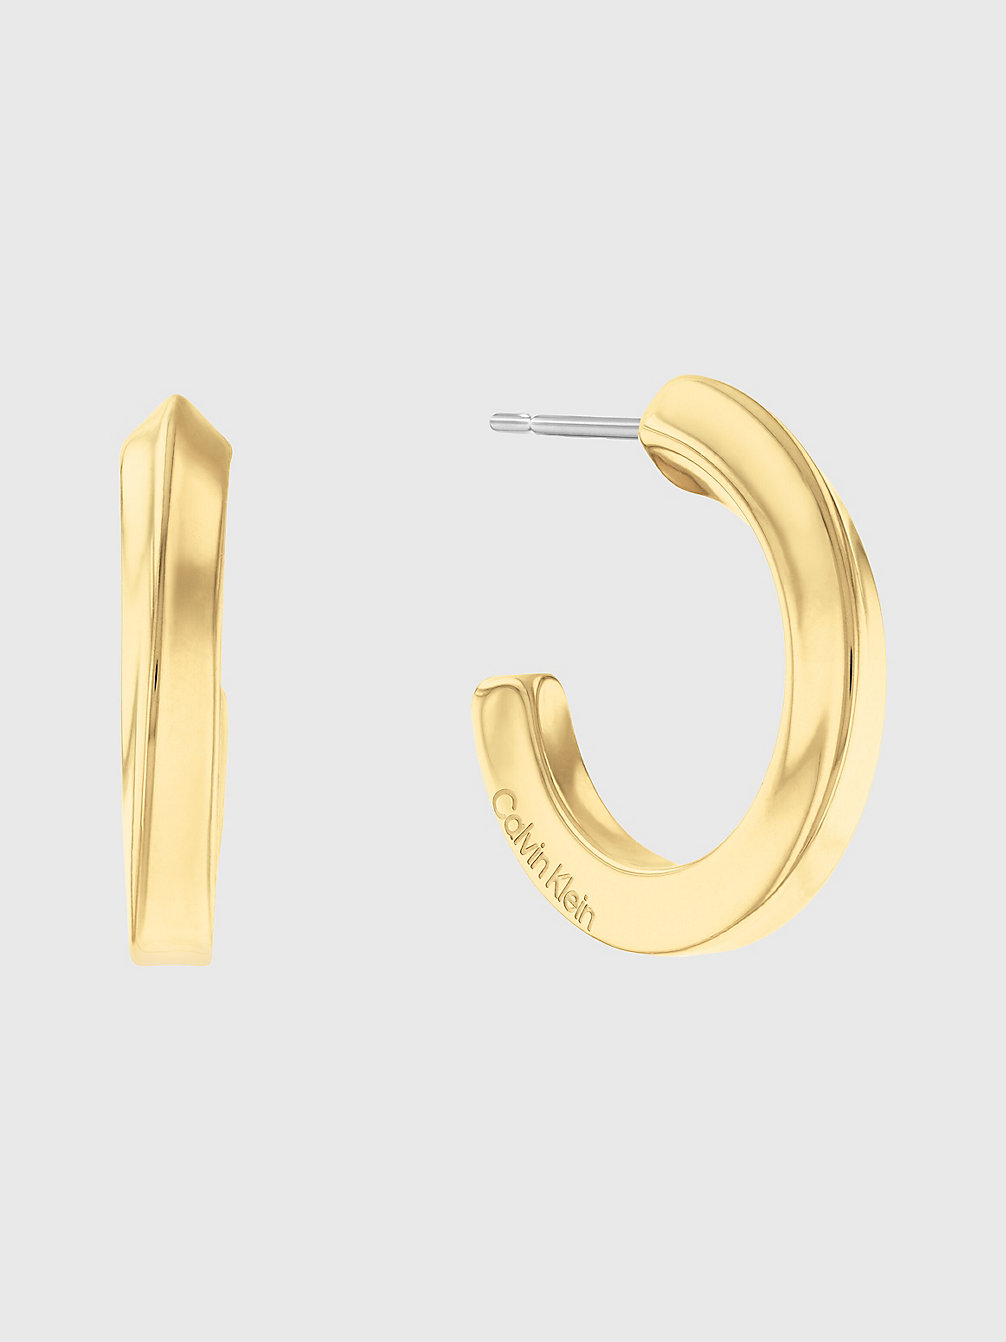 GOLD Earrings - Twisted Ring undefined women Calvin Klein